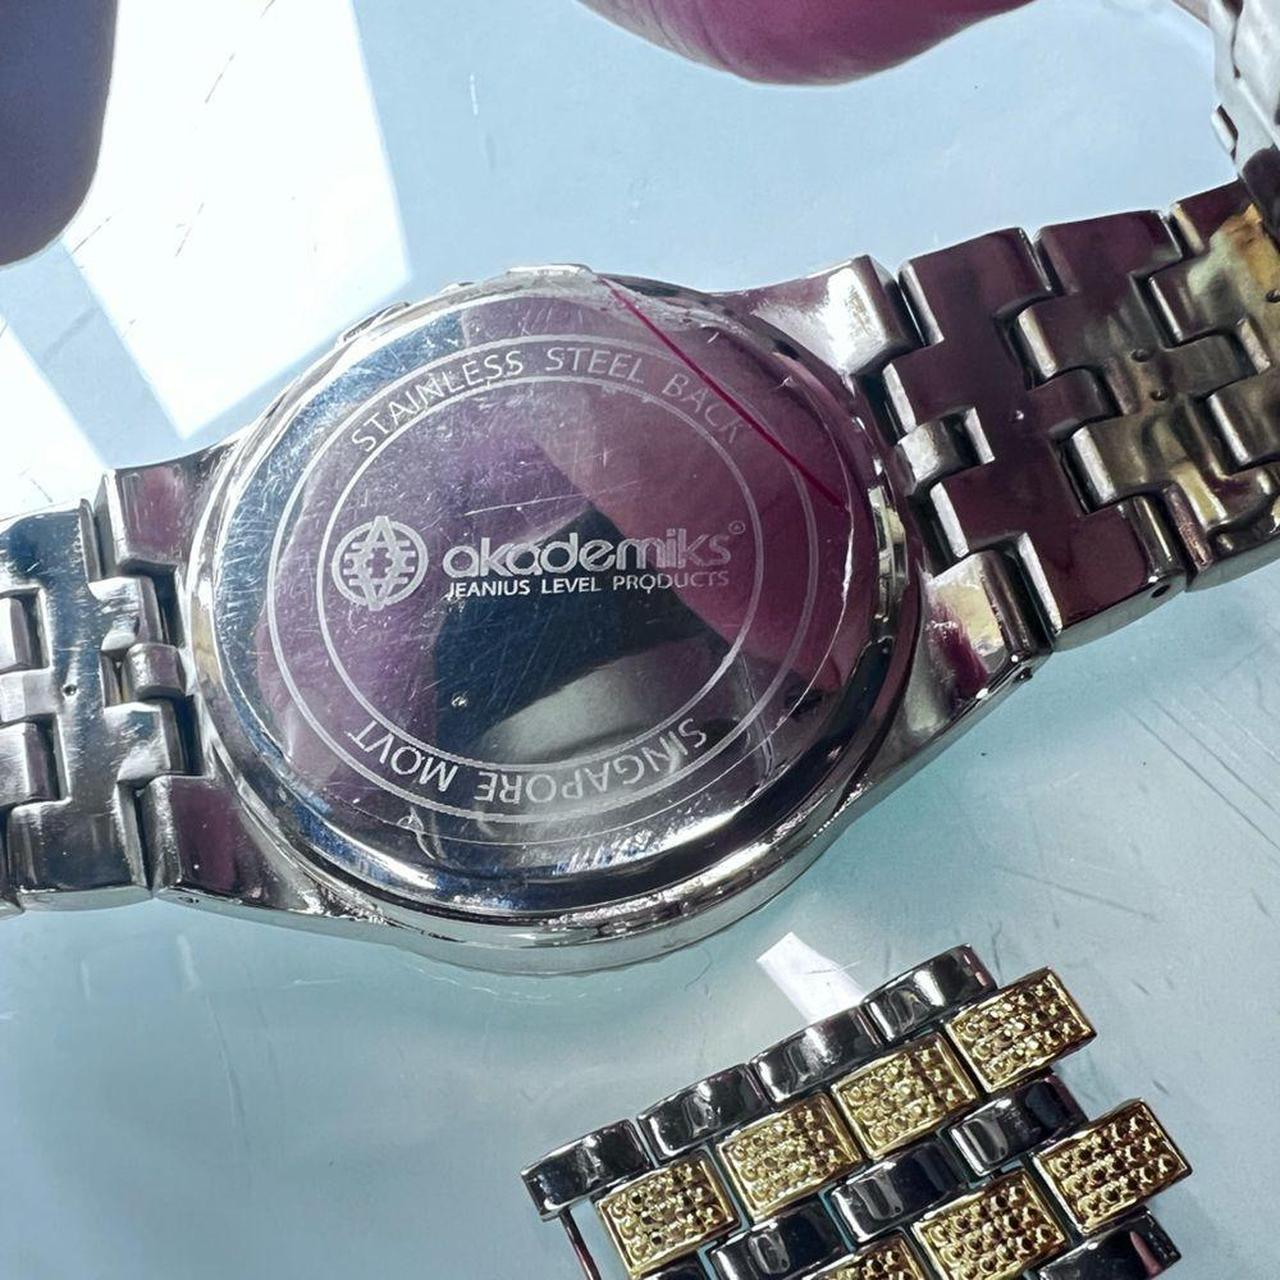 Drake Shows Off Another Rare Richard Mille Watch Worth $5.5 Million  (UPDATE) | Complex